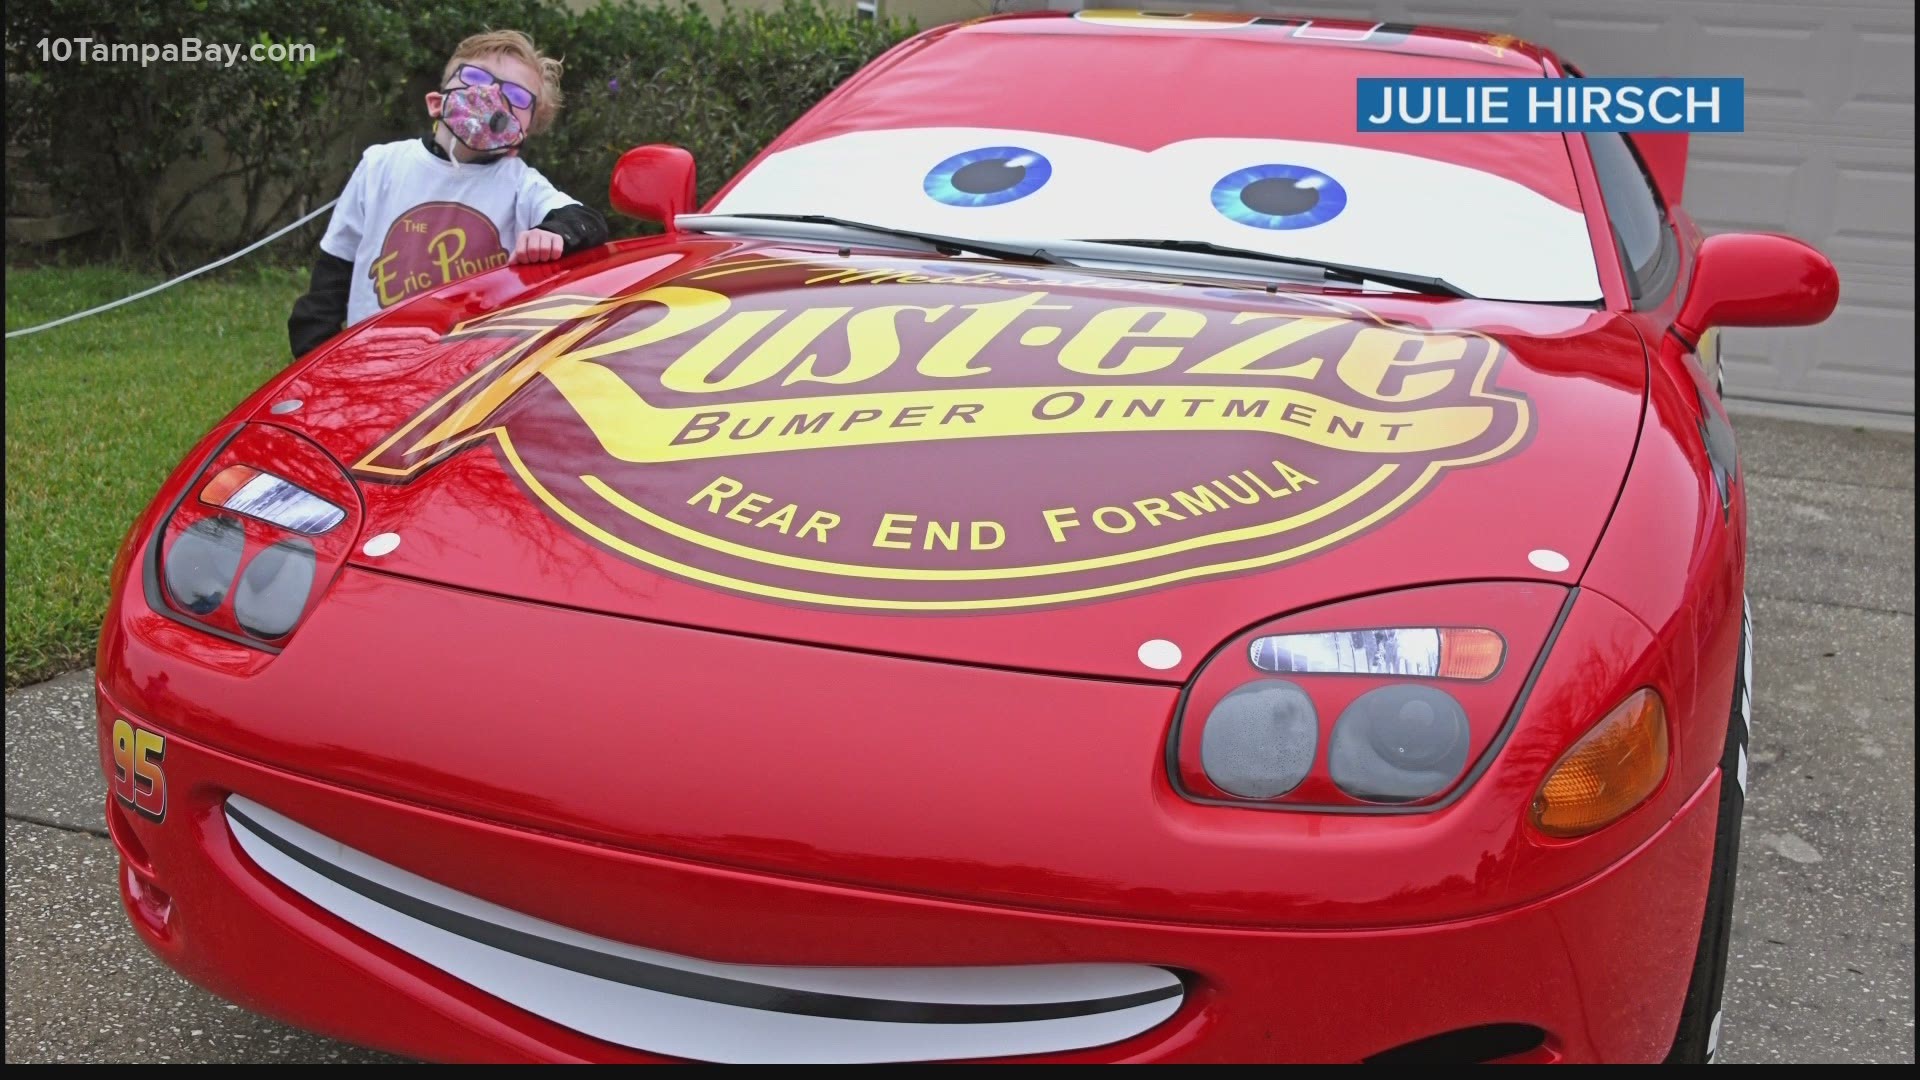 Lamborghinis dressed as Lightning McQueen highlighted a drive-by birthday parade to celebrate a terminally-ill teenager.